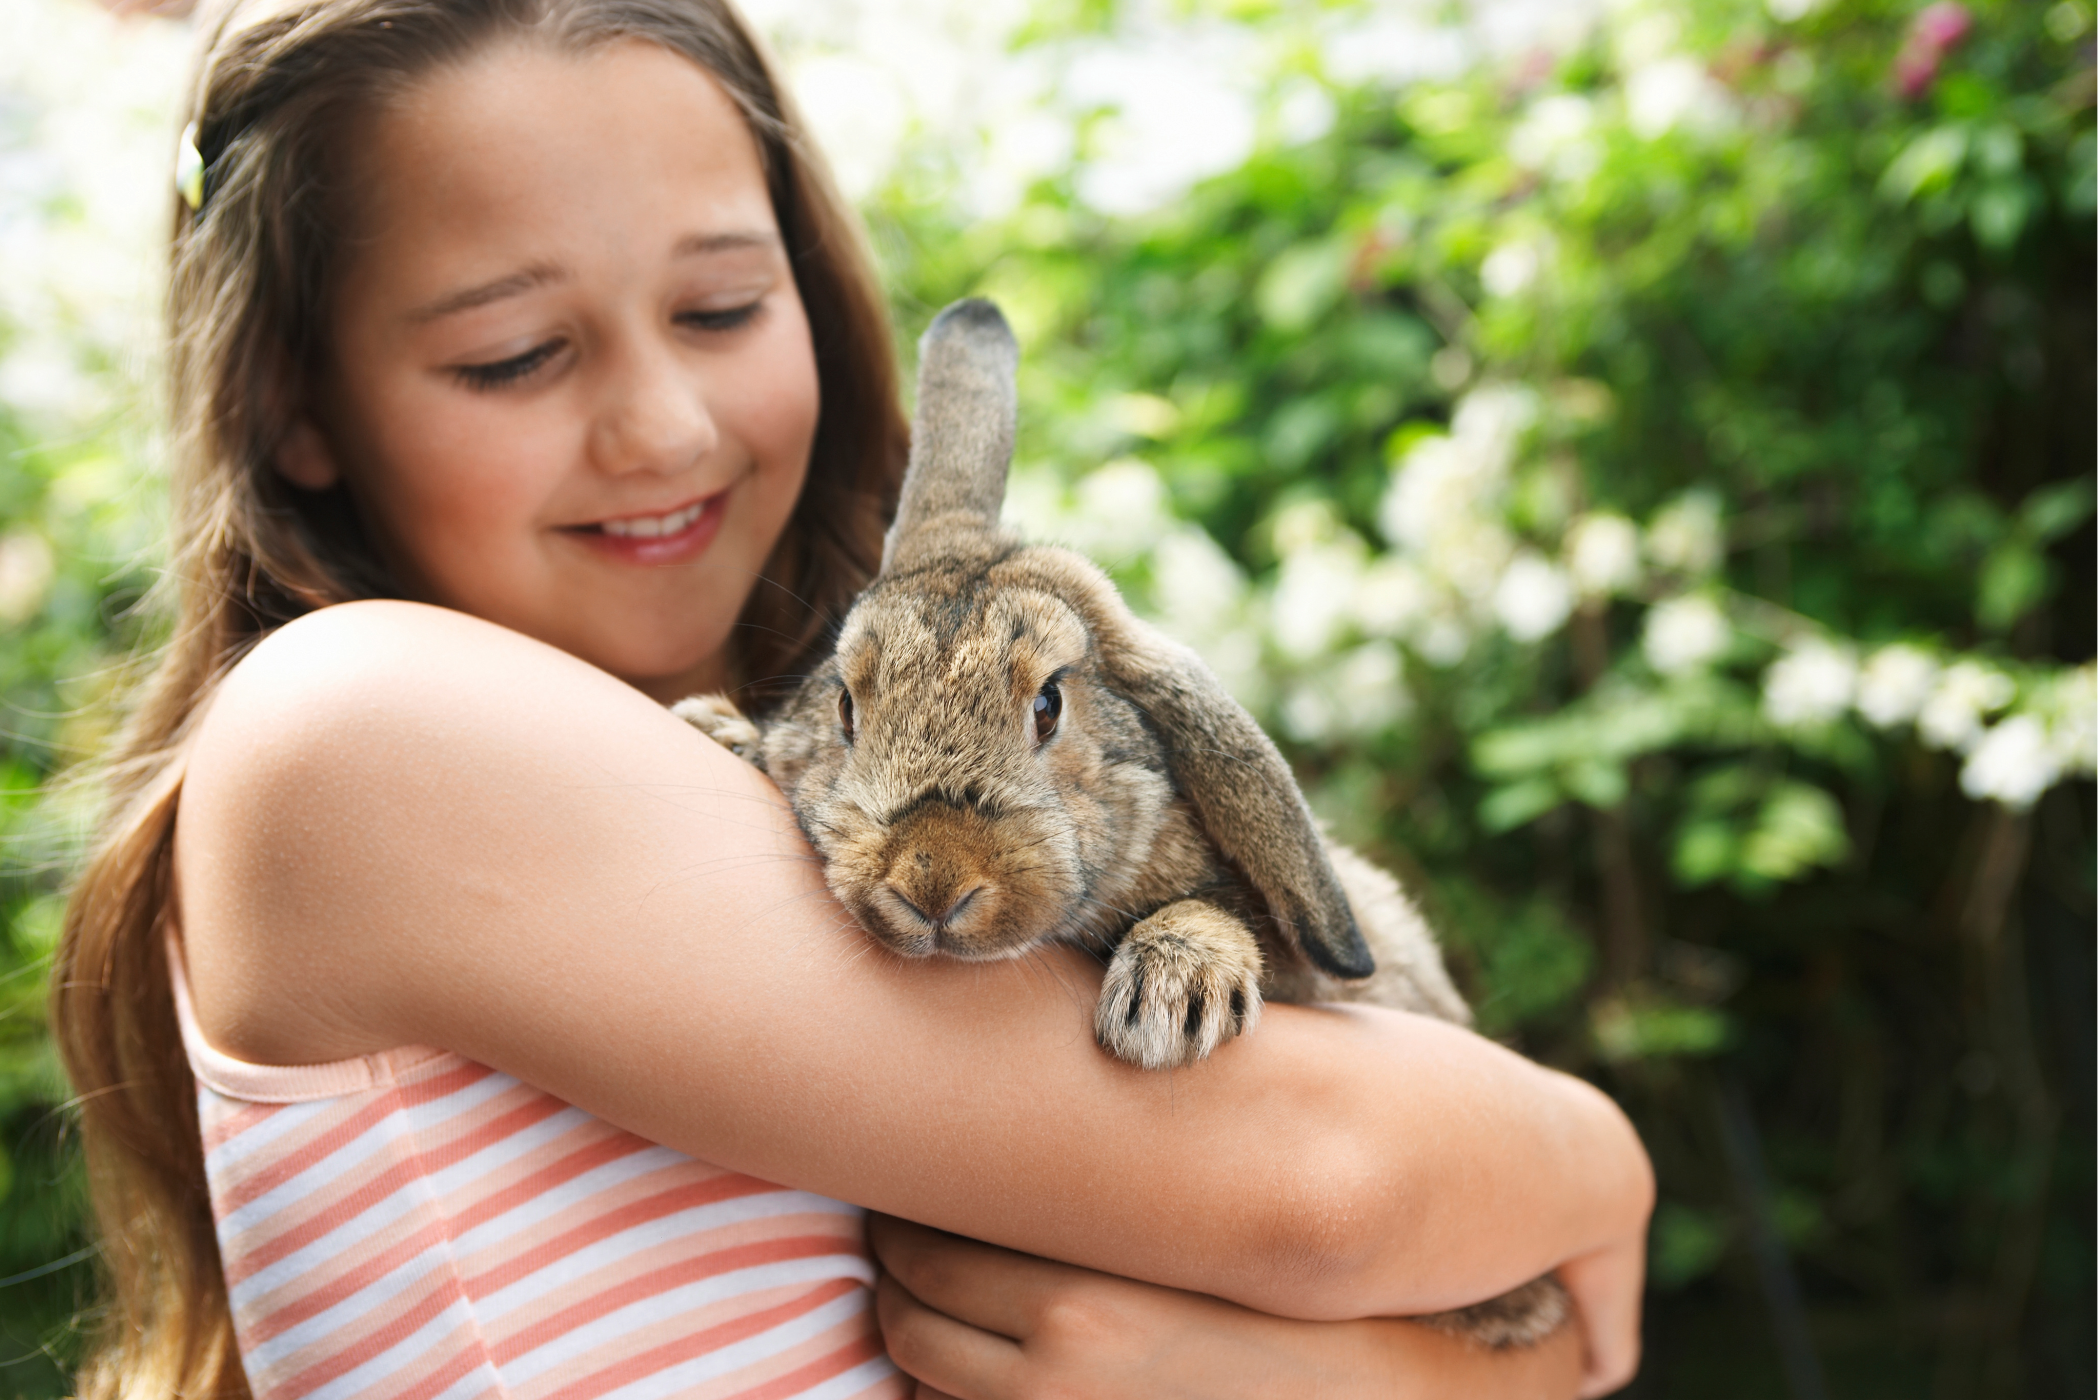 A little girl with her pet rabbit.